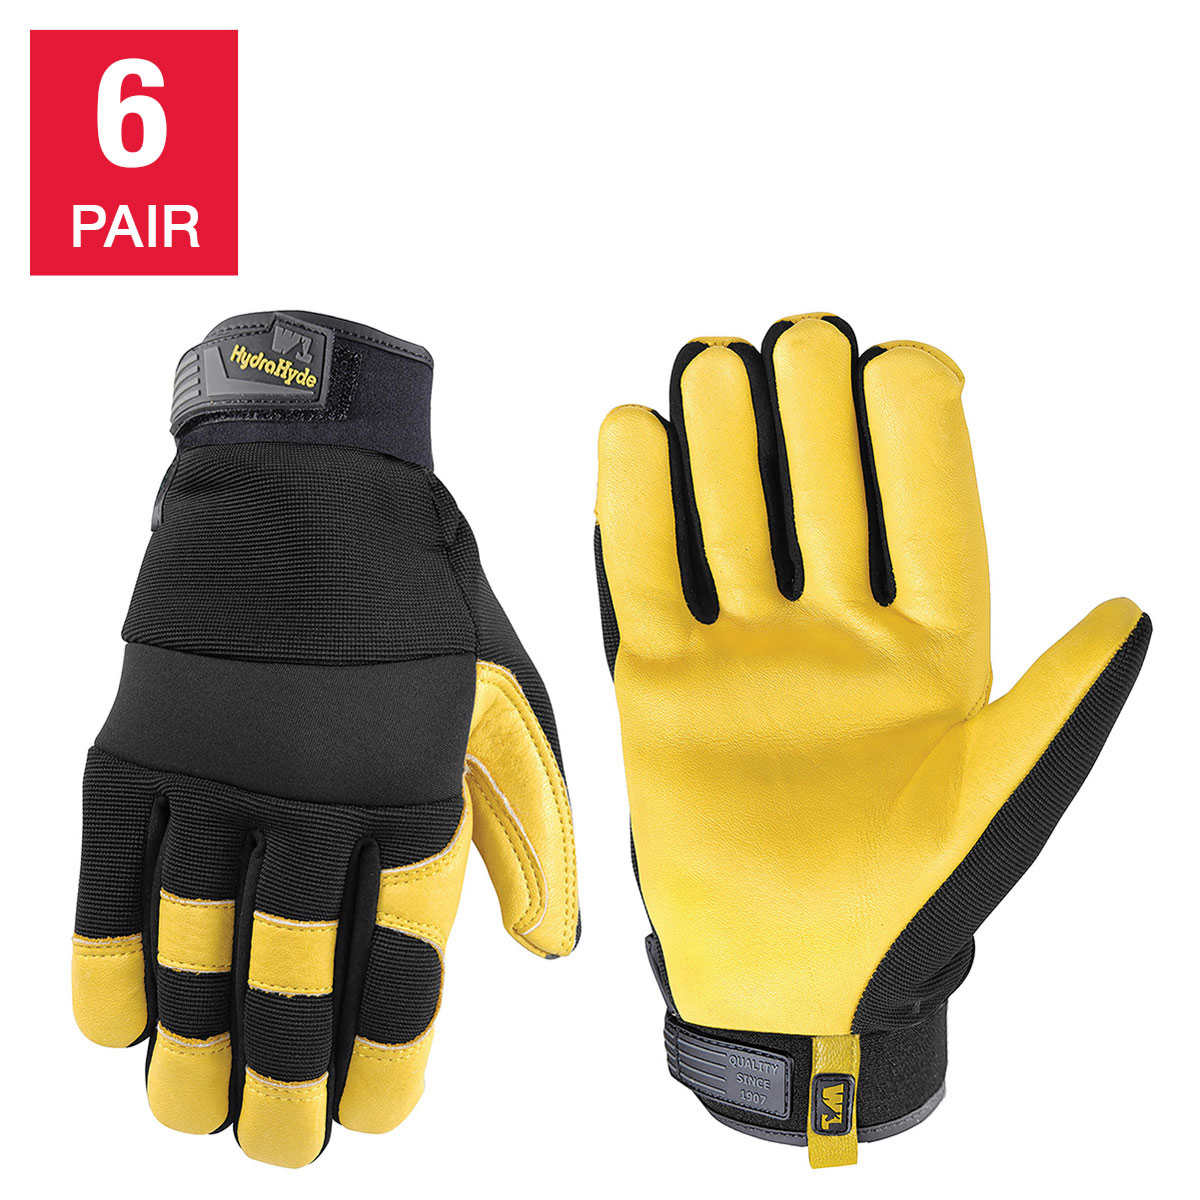 PAIR of Gardening Club gloves rubber fronts breathable back 1 size fits all 1 